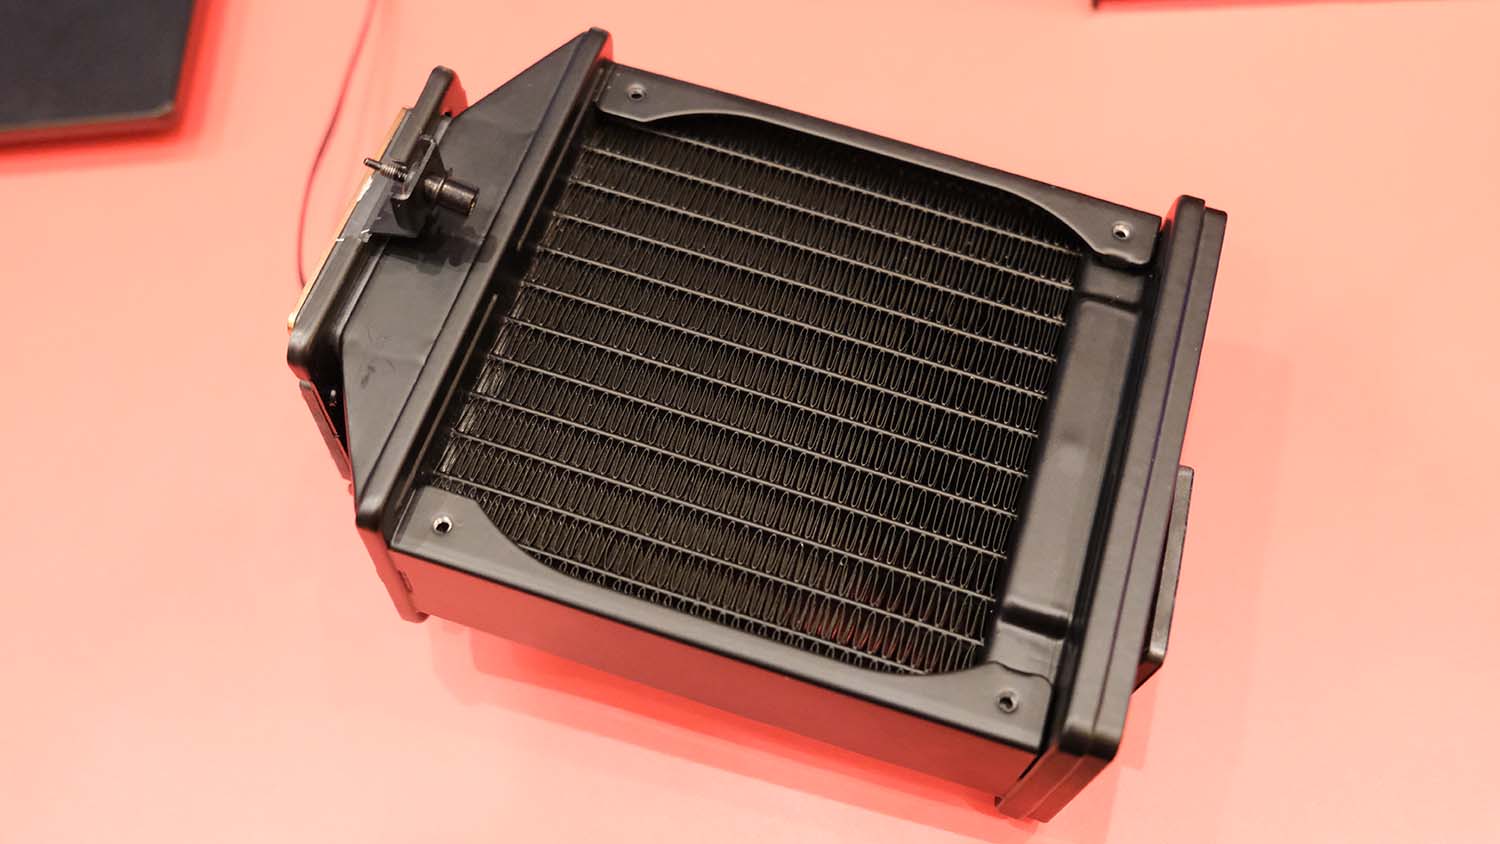 Adata XPG cooling protoype uses an optimised radiator within a conventional air-cooling chassis.